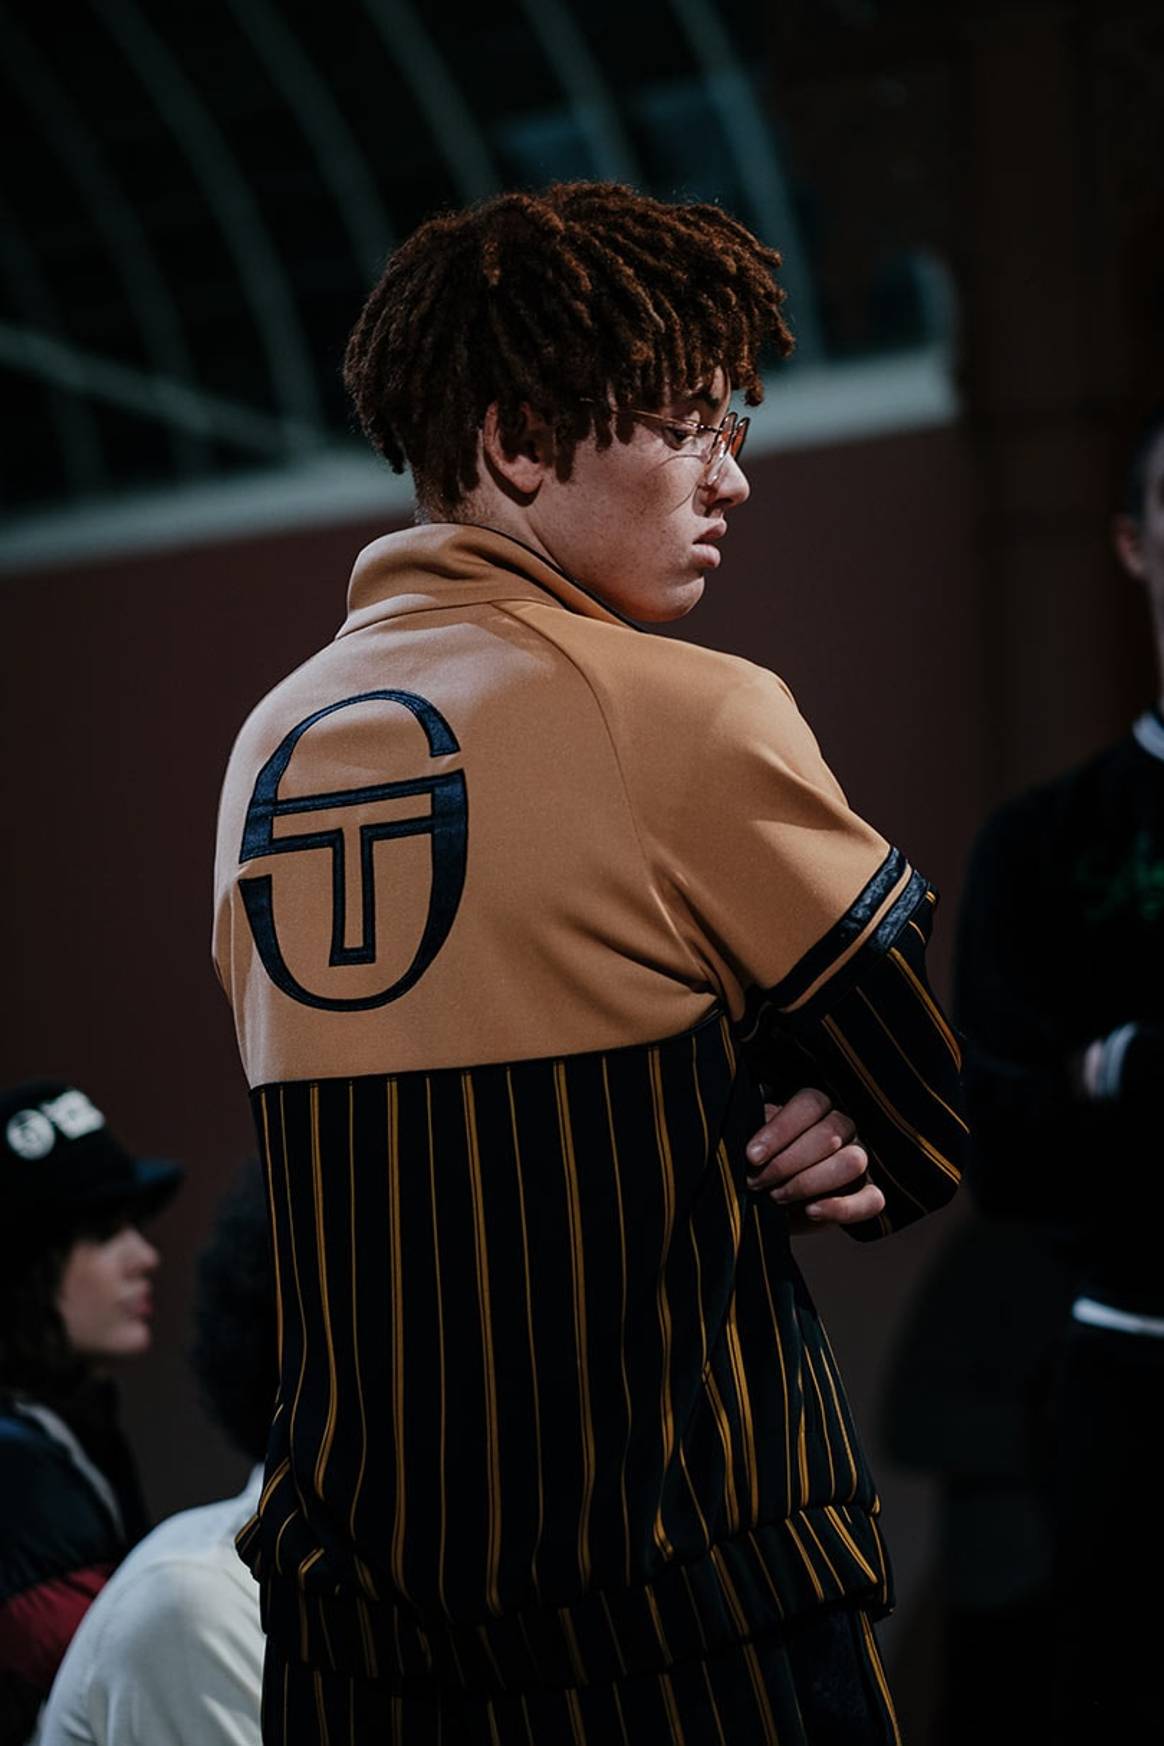 Dao-Yi Chow presents debut collection for Sergio Tacchini